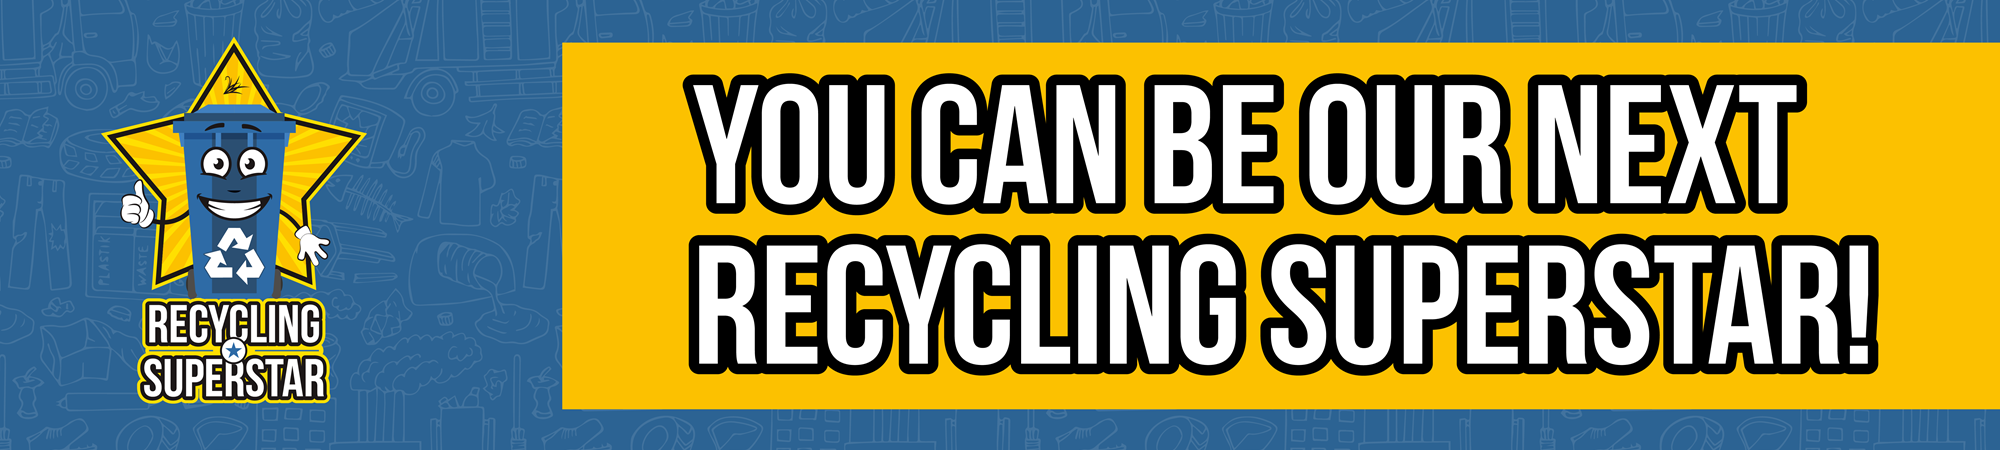 you can be our next recycling superstar - recycling superstar logo